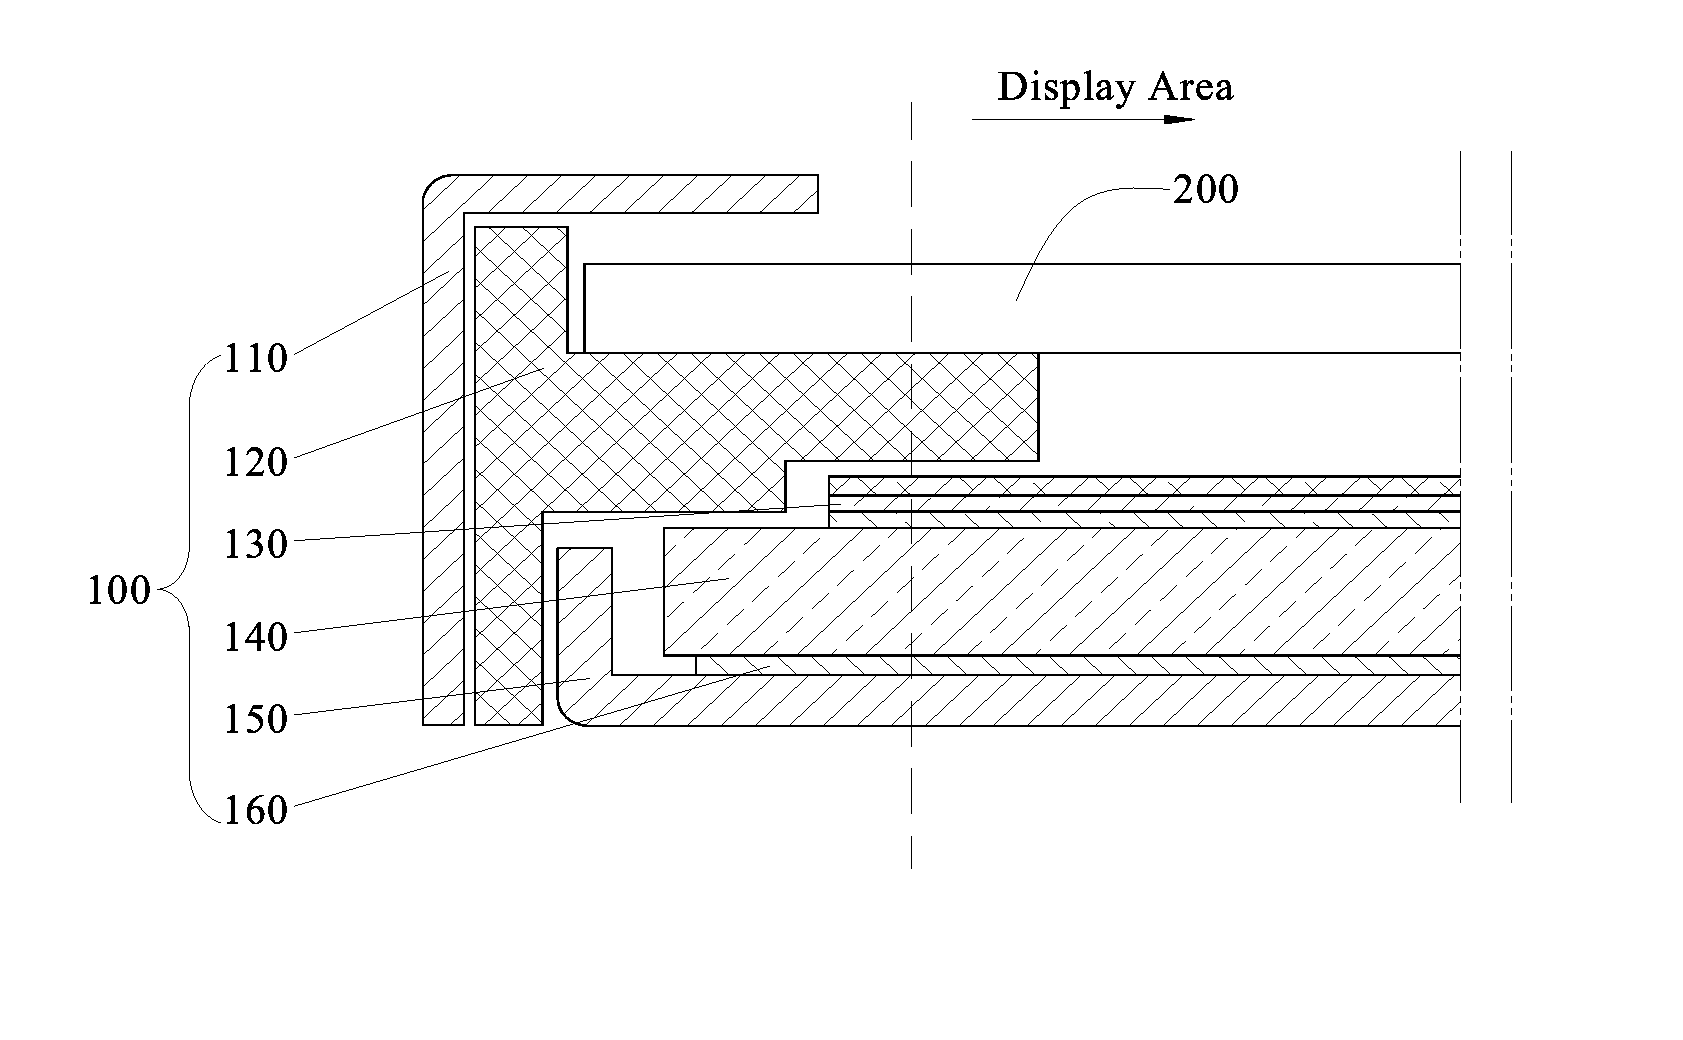 Backlight and Display Device